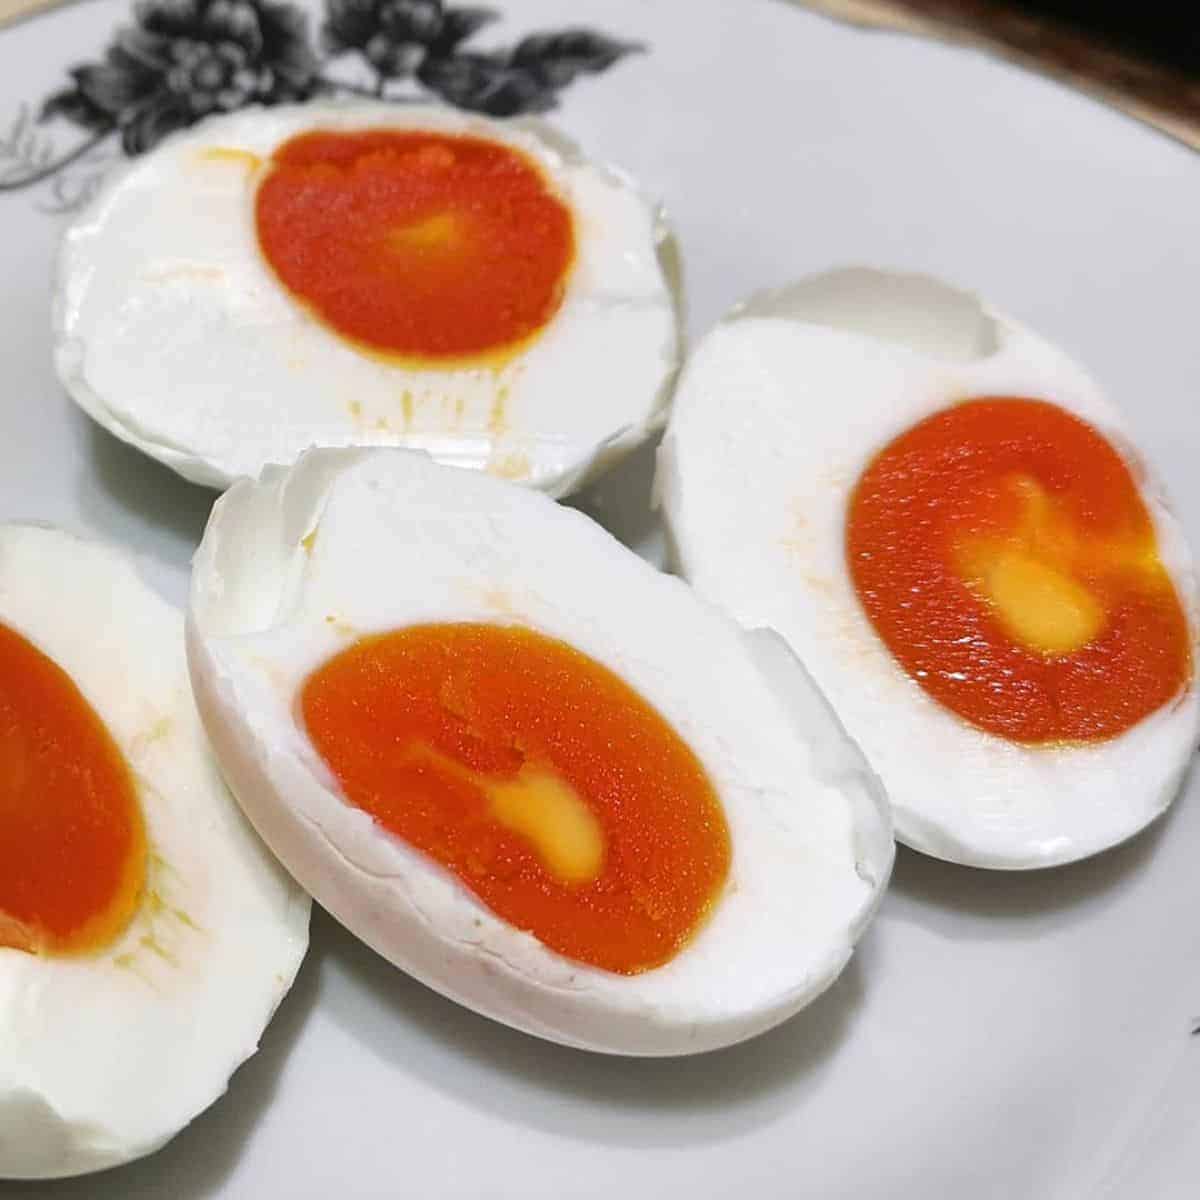 How to make salted eggs recipe at home